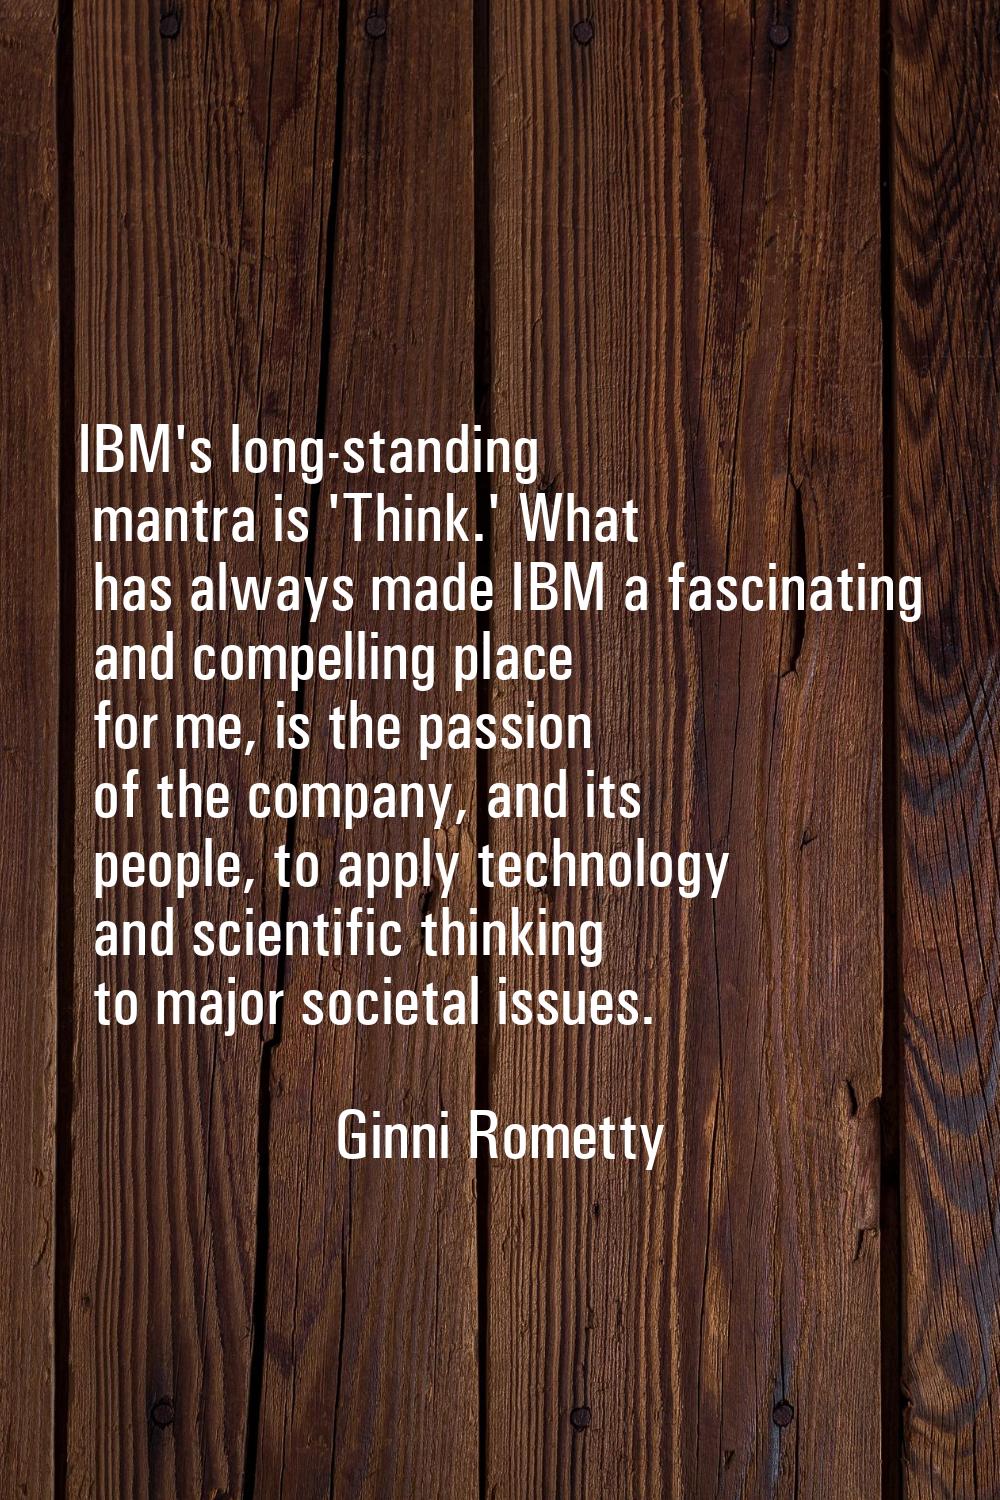 IBM's long-standing mantra is 'Think.' What has always made IBM a fascinating and compelling place 